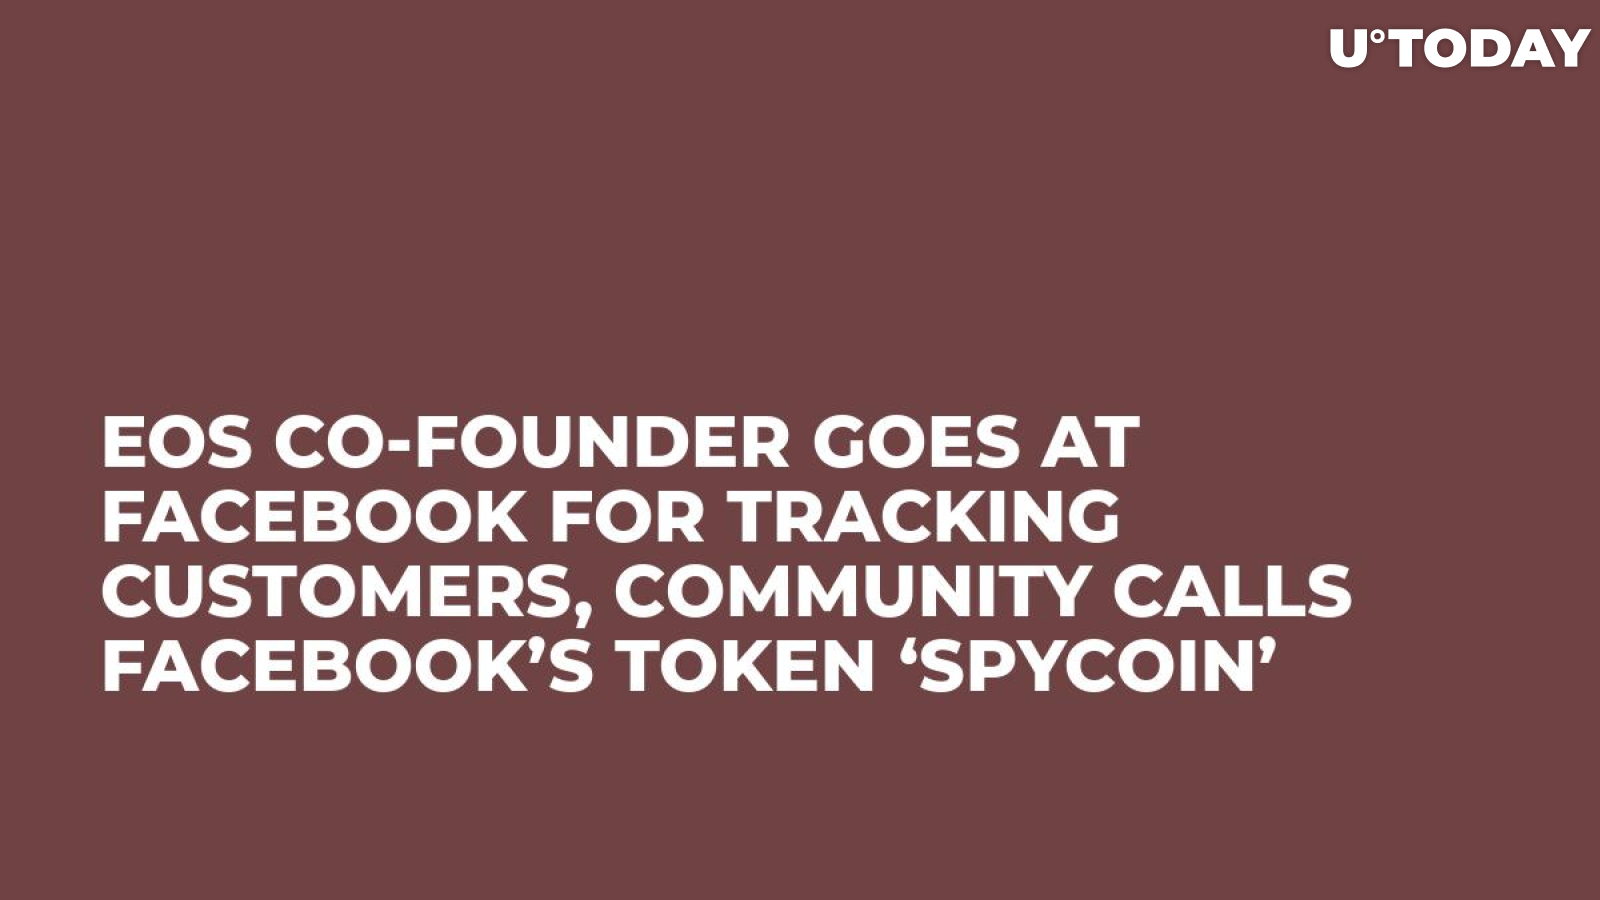 EOS Co-Founder Goes at Facebook for Tracking Customers, Community Calls Facebook’s Token ‘Spycoin’